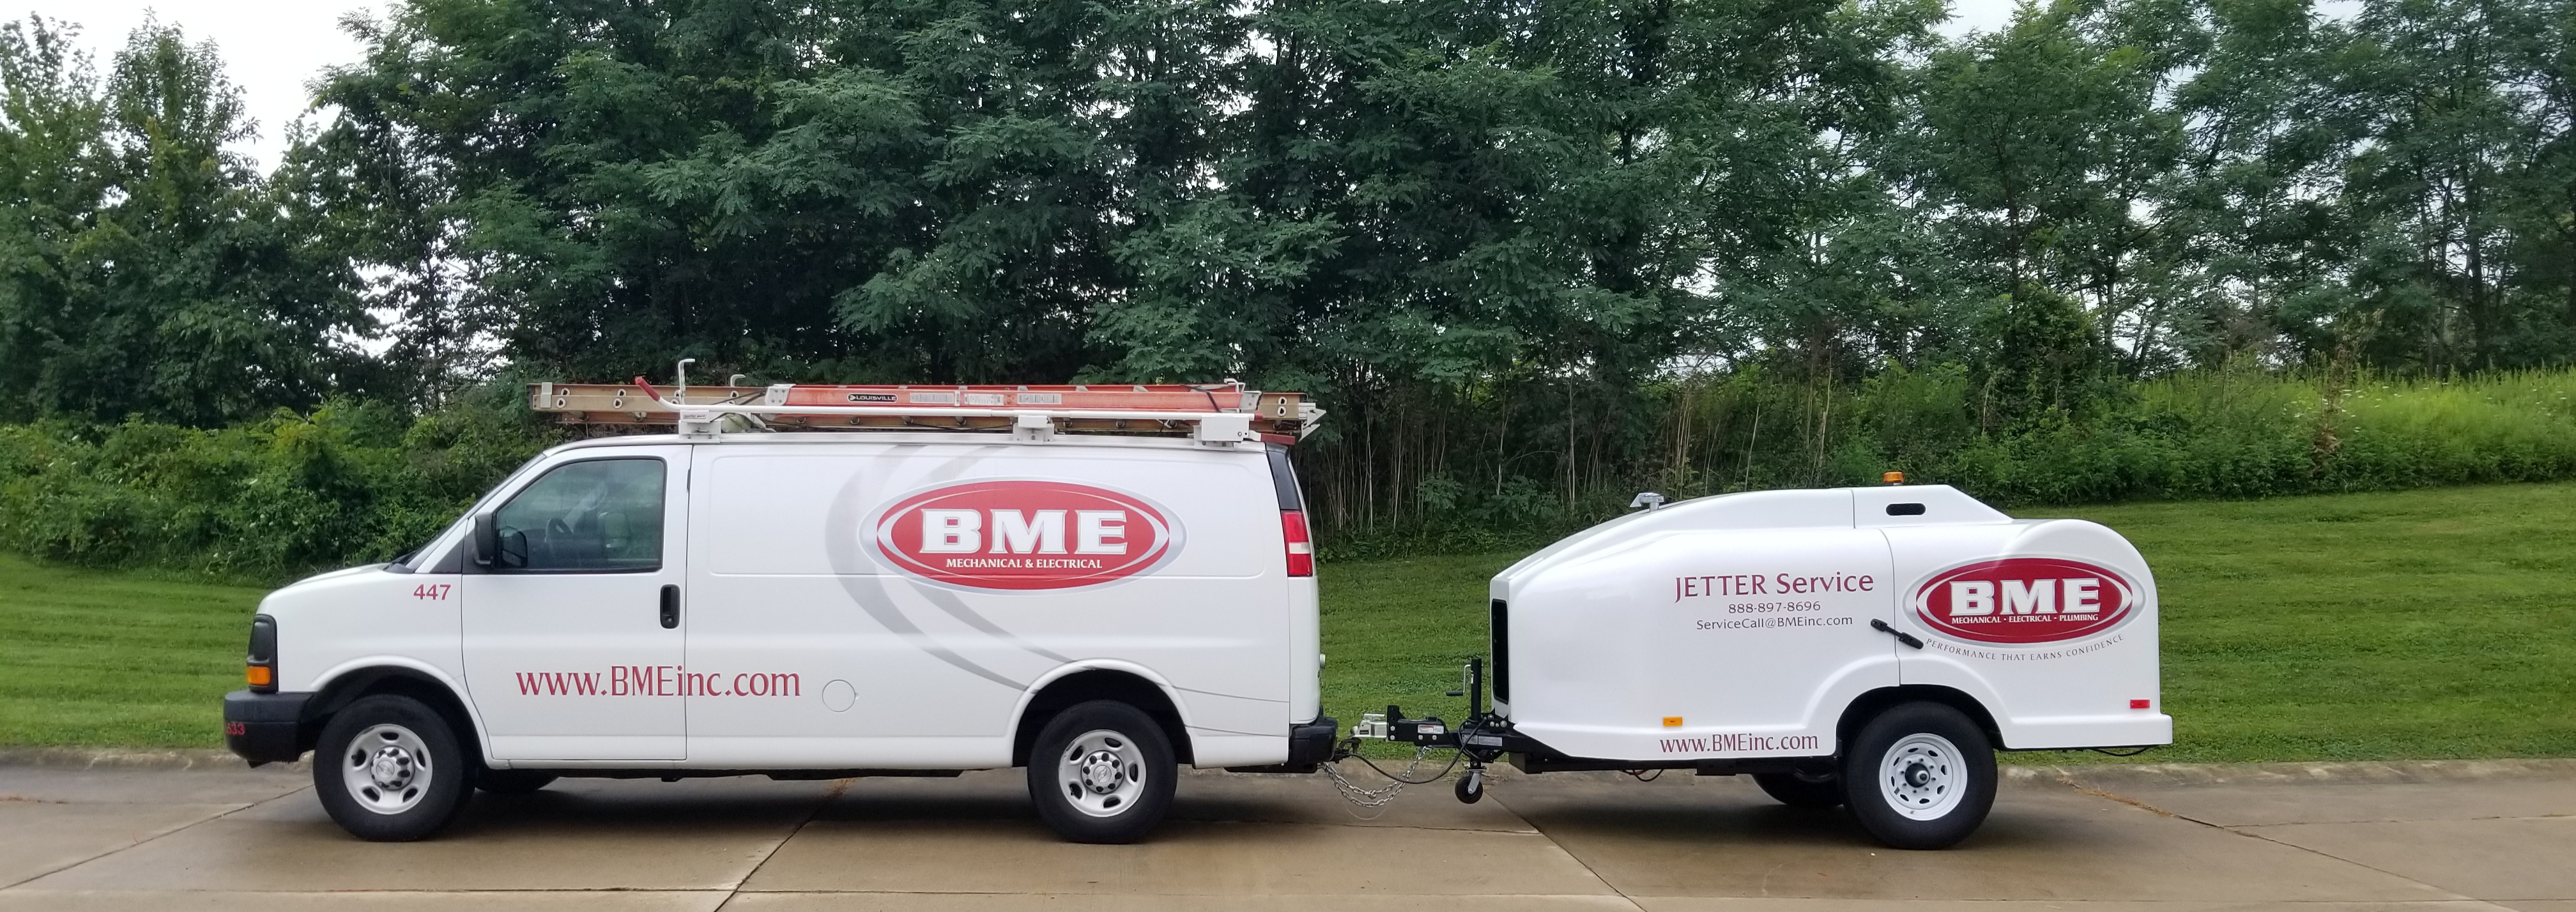 BME - Midwest's leading specialized mechanical contractor, provides mechanical, electrical, HVAC and plumbing services for commercial and industrial partners servicing all of Ohio, Indiana, Kentucky and Tennessee.  Call 888.897.8696 Anytime! - Water Drain Services